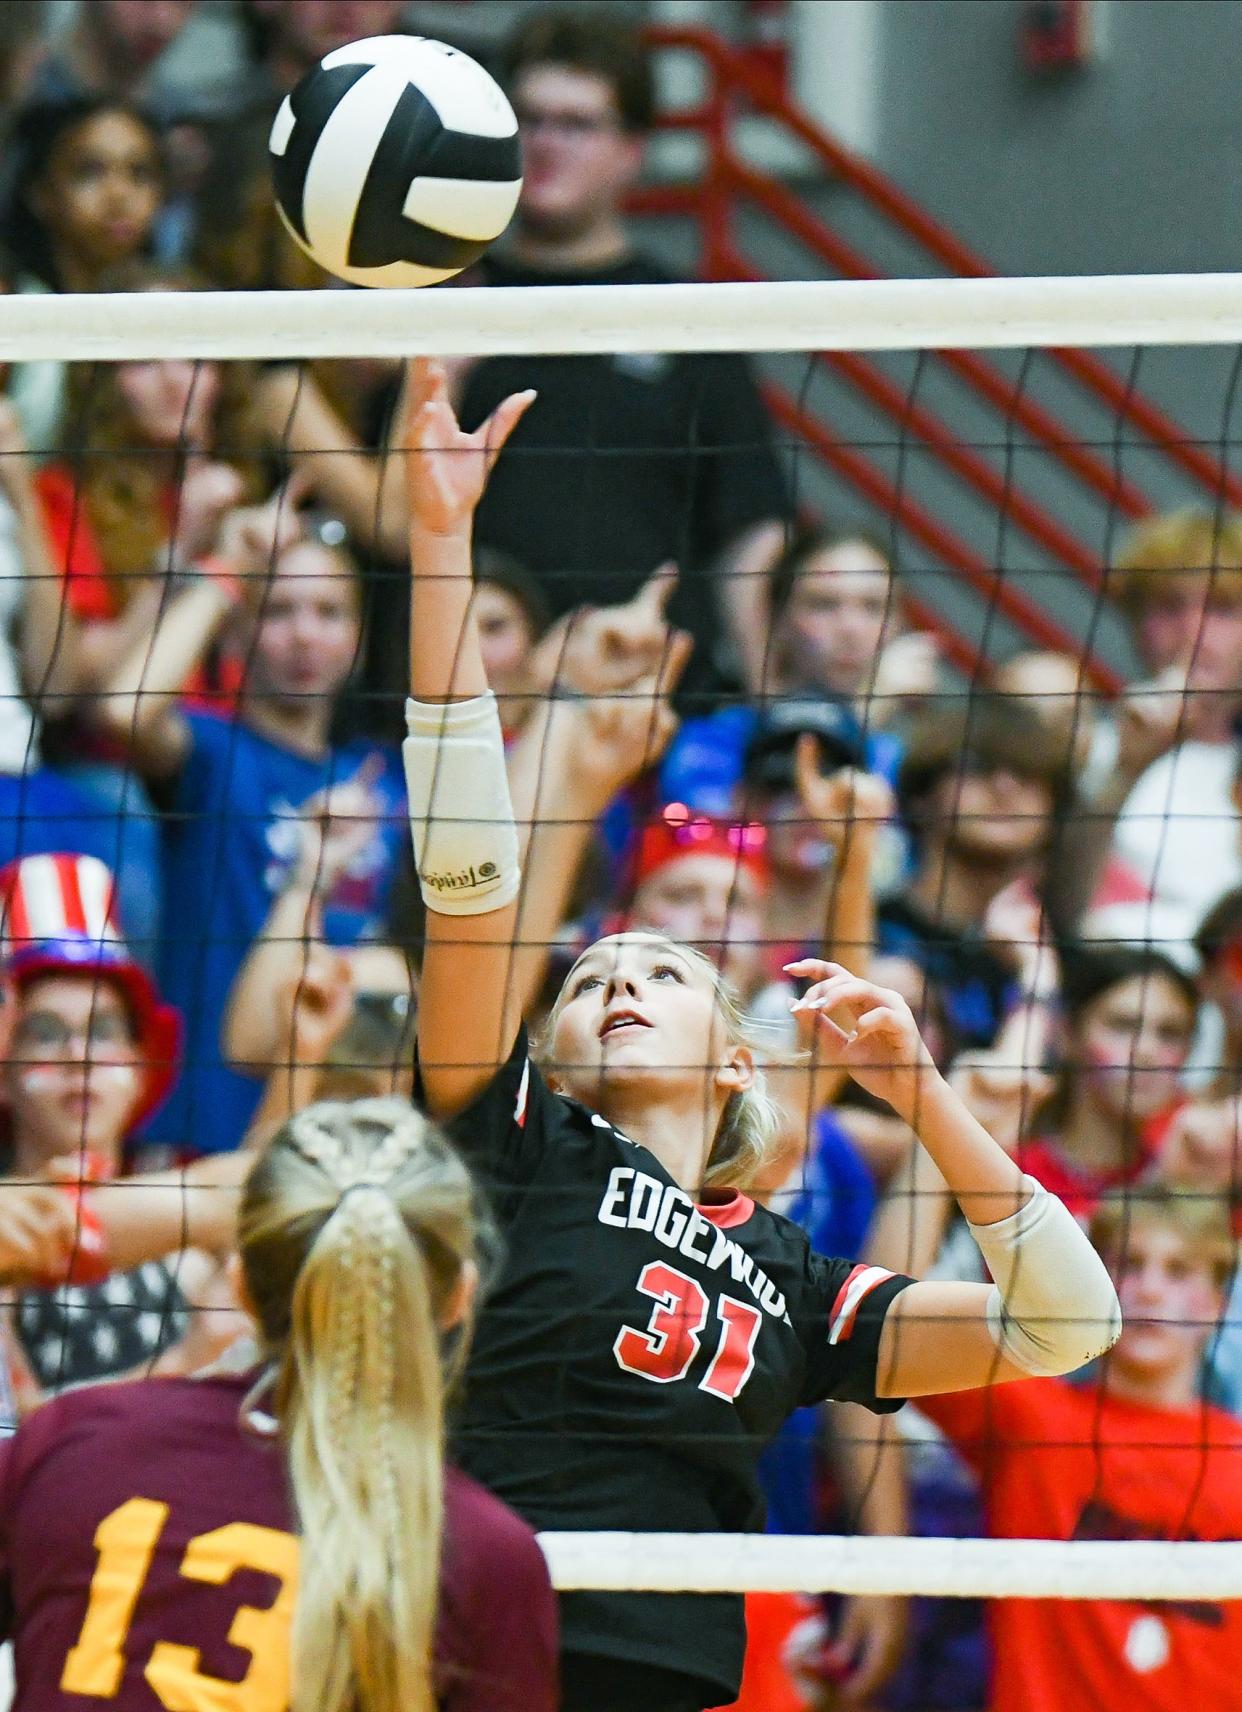 Edgewood’s Paige Roper (31) hits the ball during the volleyball match against Bloomington North at Edgewood on Thursday, Sept. 28, 2023.